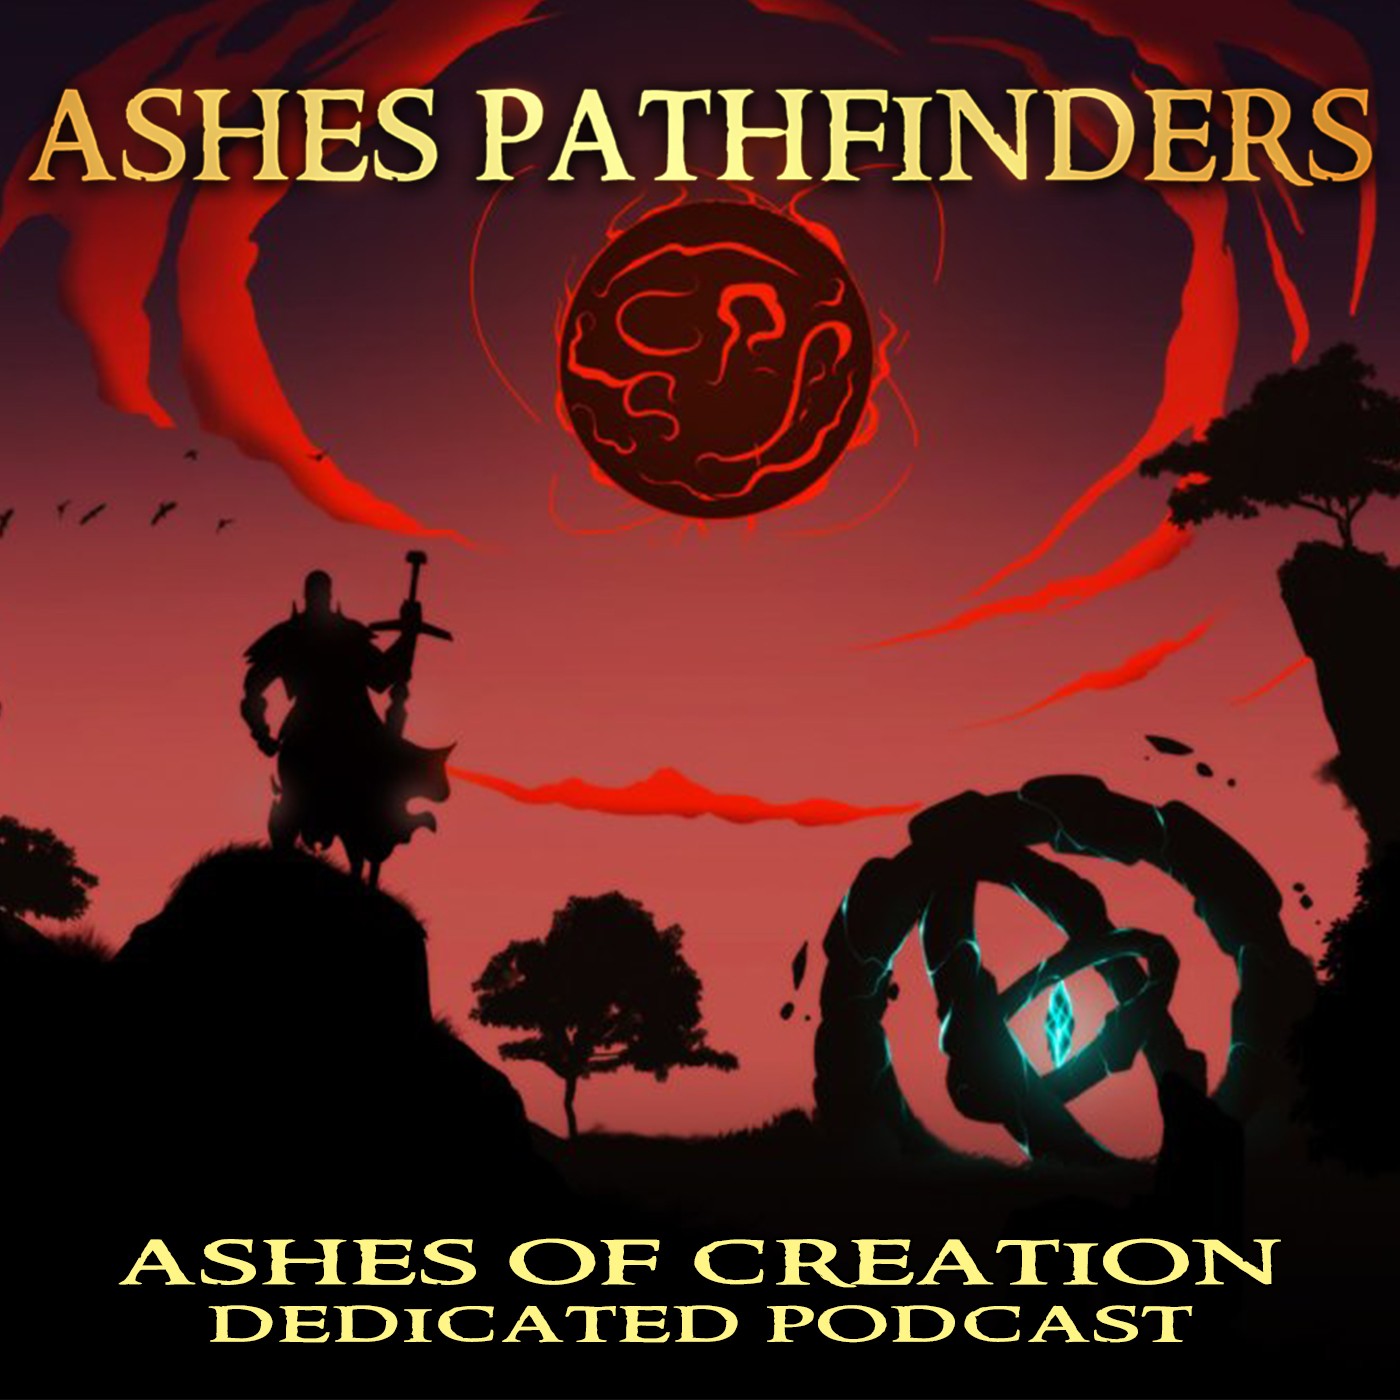 Ashes Pathfinders